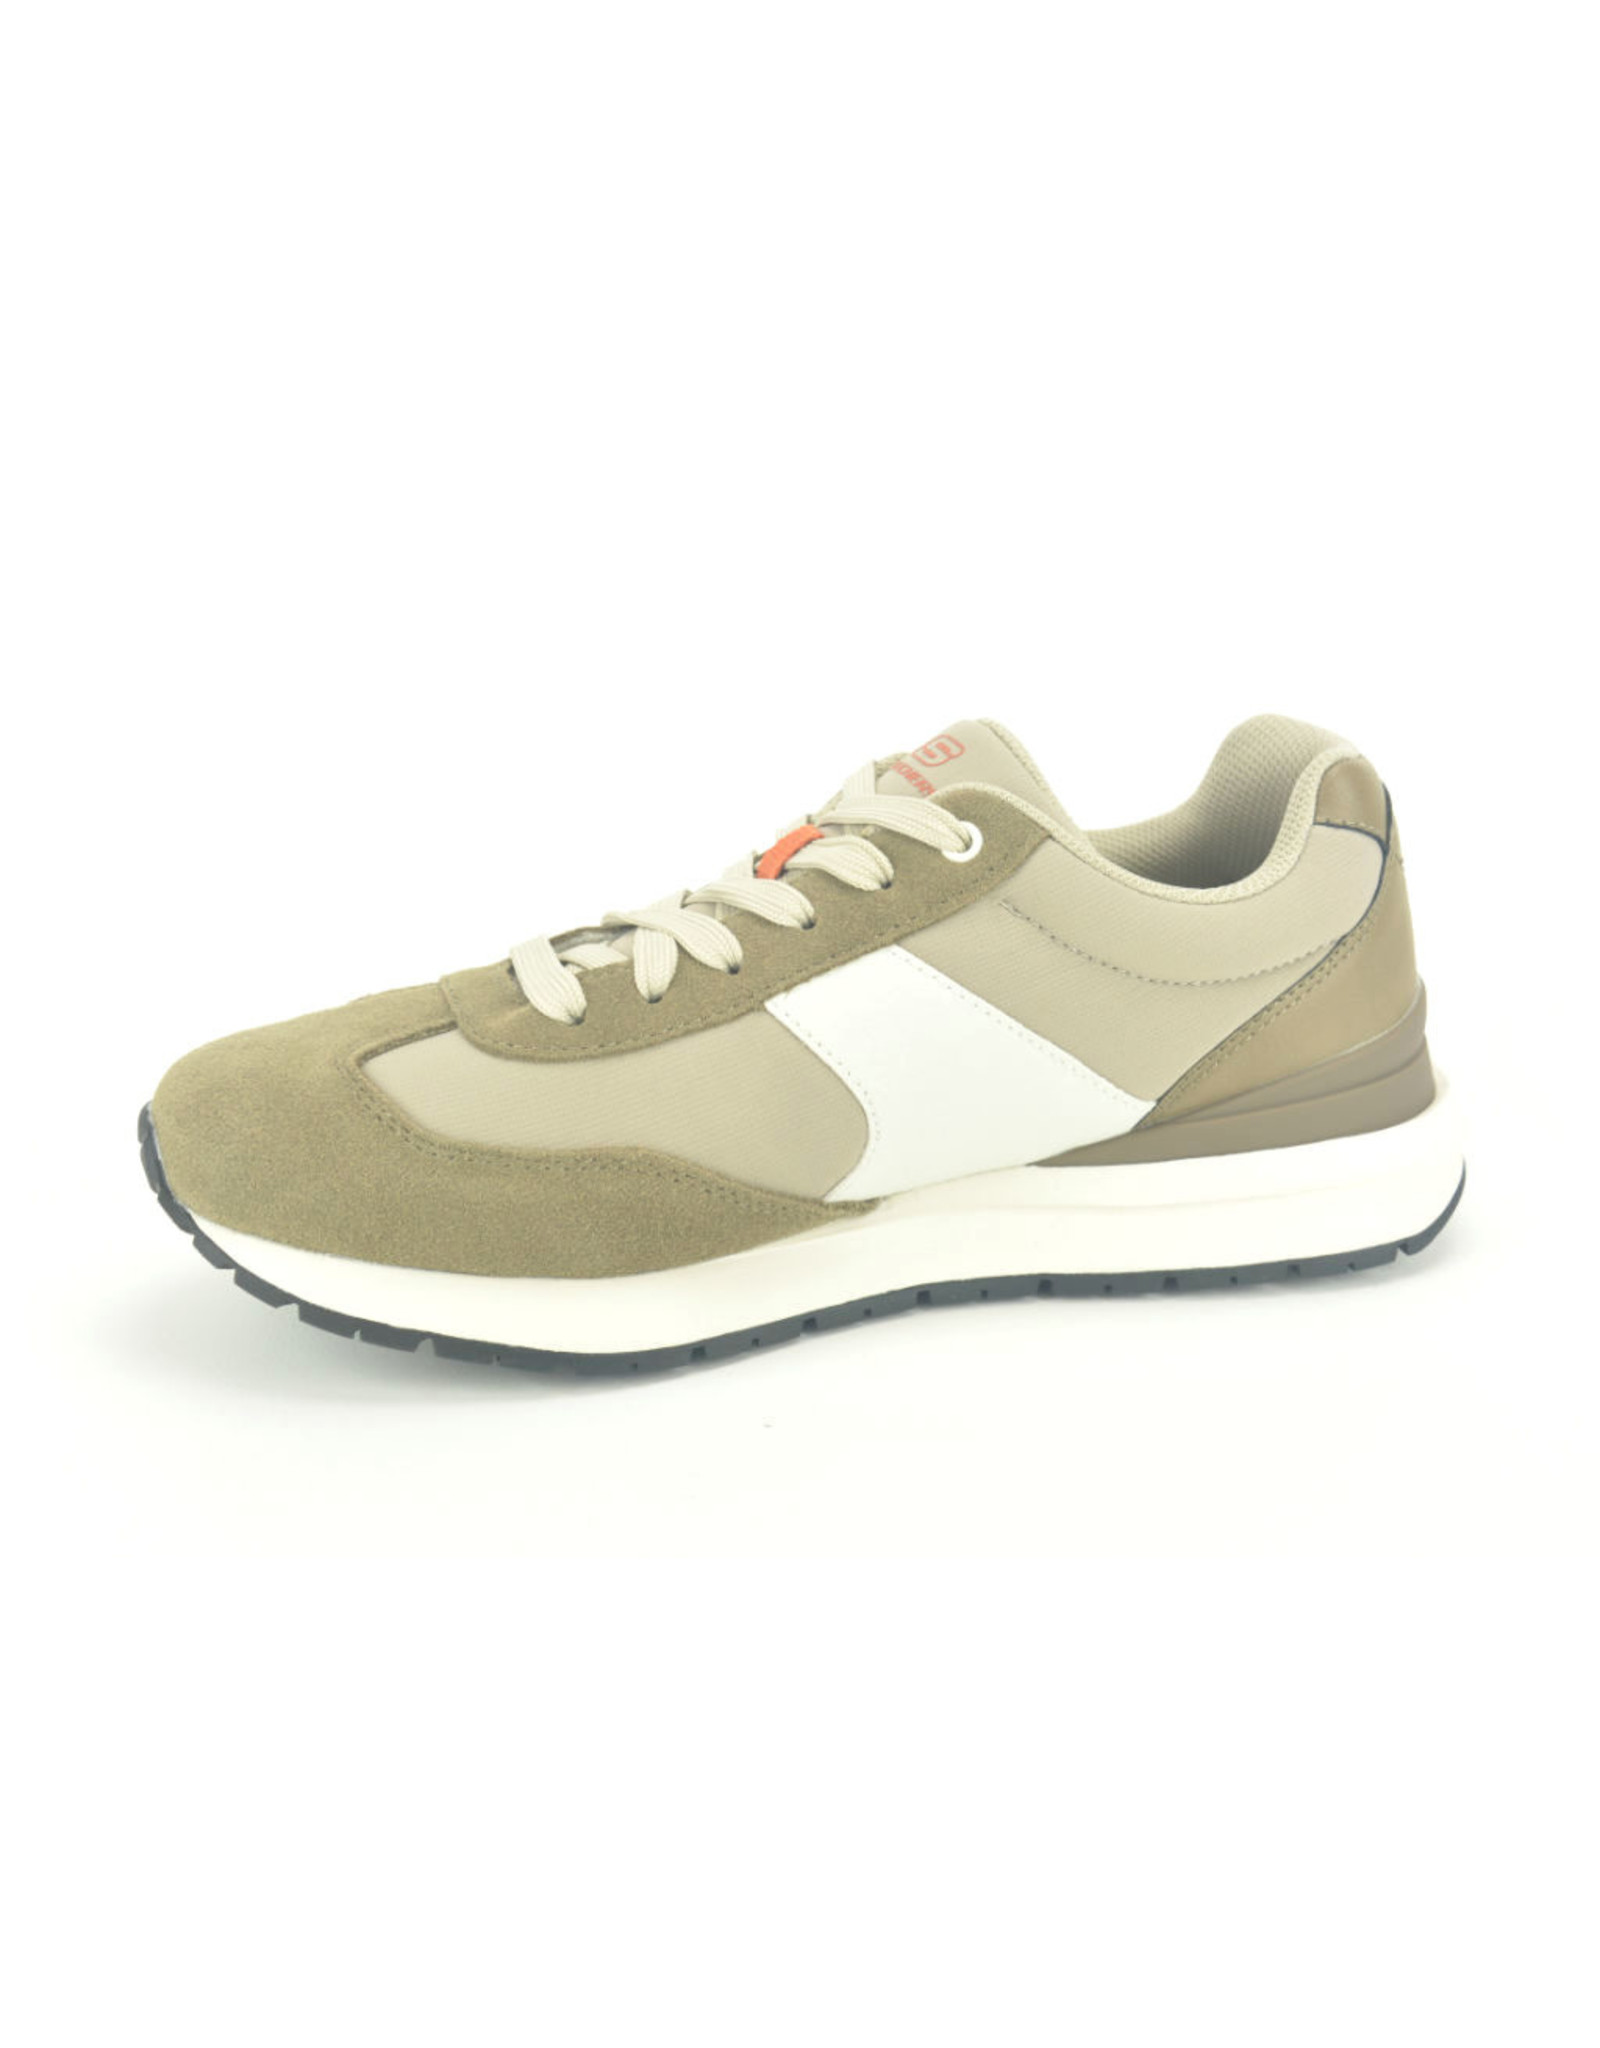 Skechers 11683 taupe